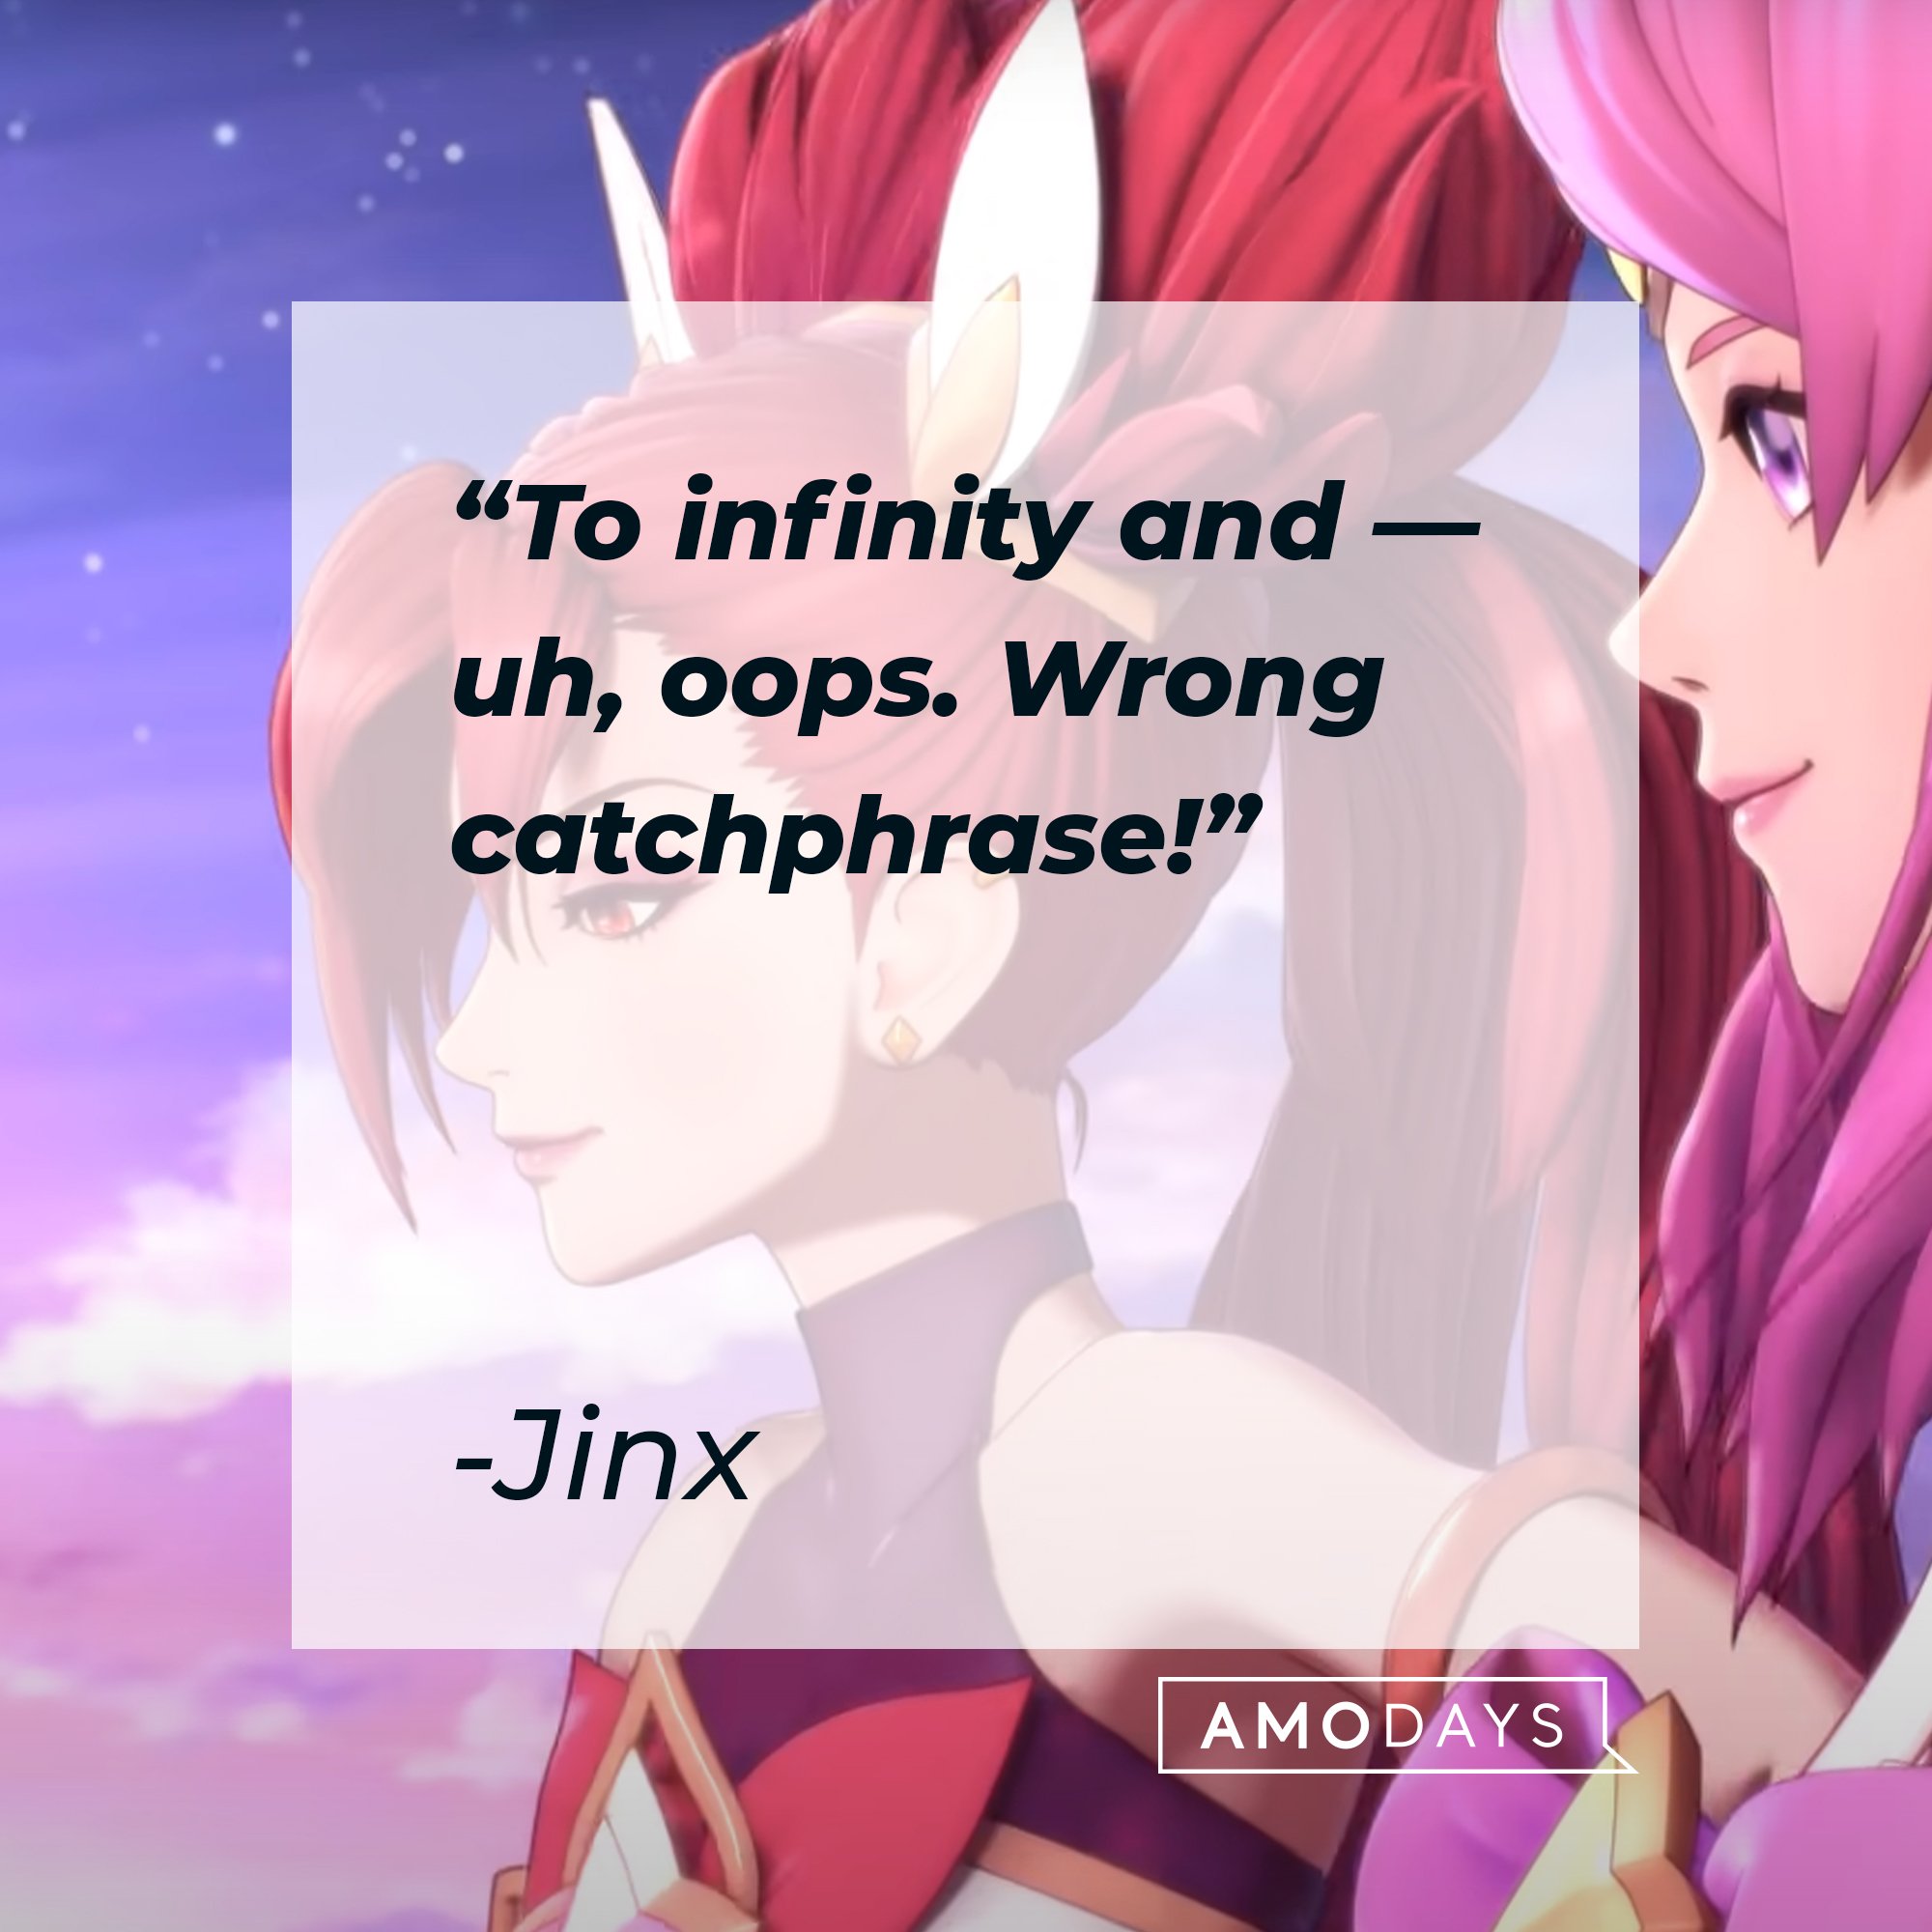 Jinx's quote: "To infinity and — uh, oops. Wrong catchphrase!"  | Image: AmoDays